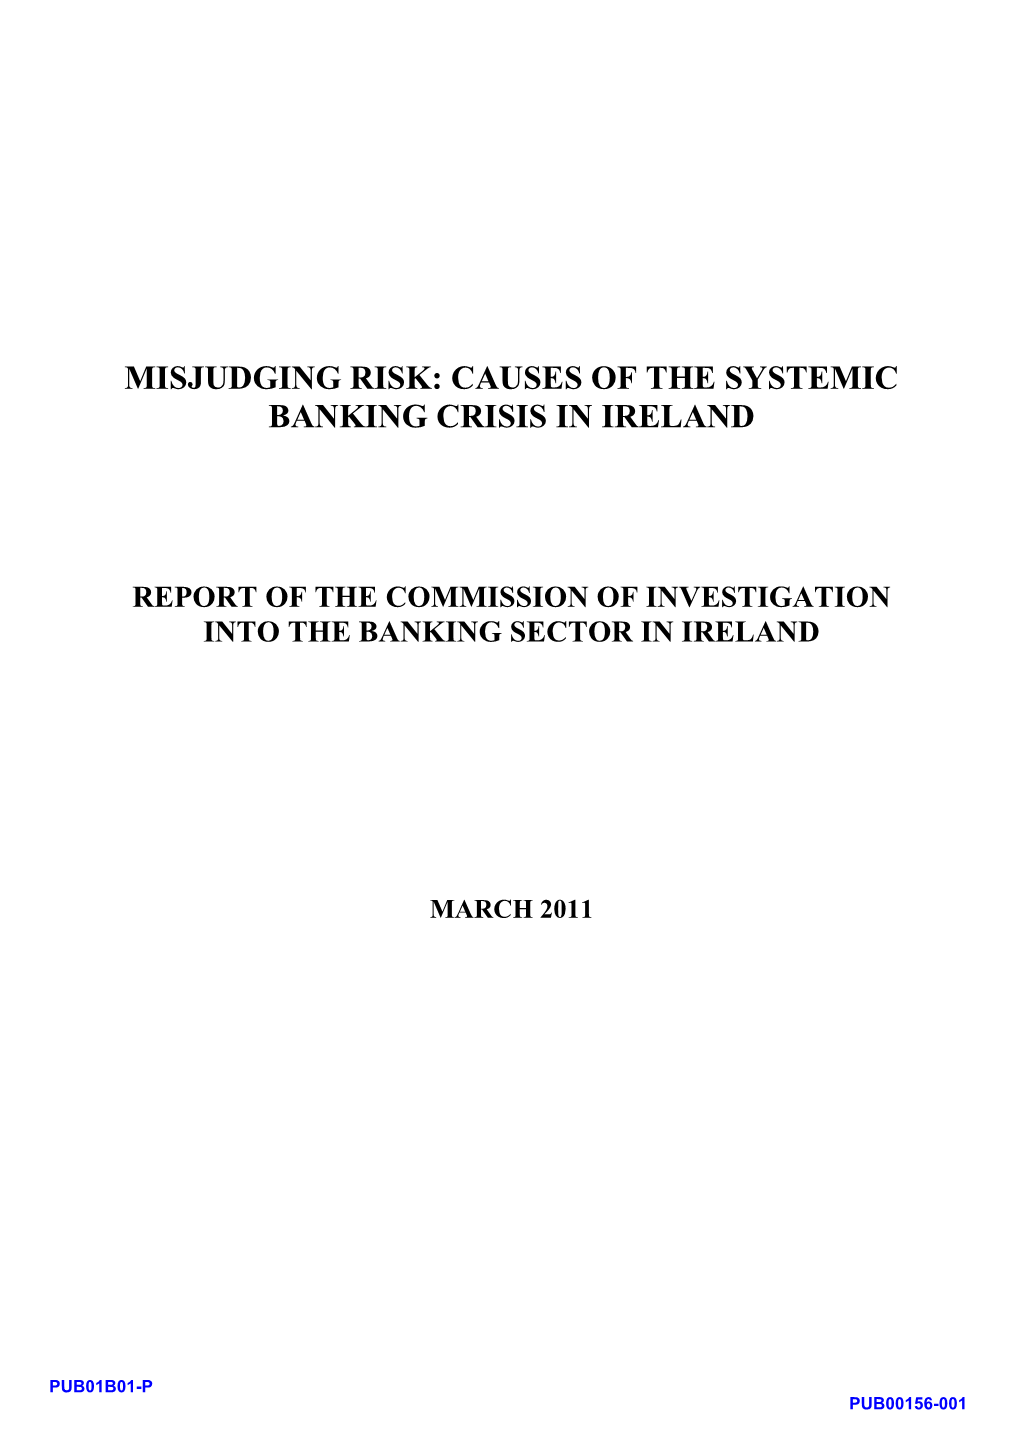 Causes of the Systemic Banking Crisis in Ireland